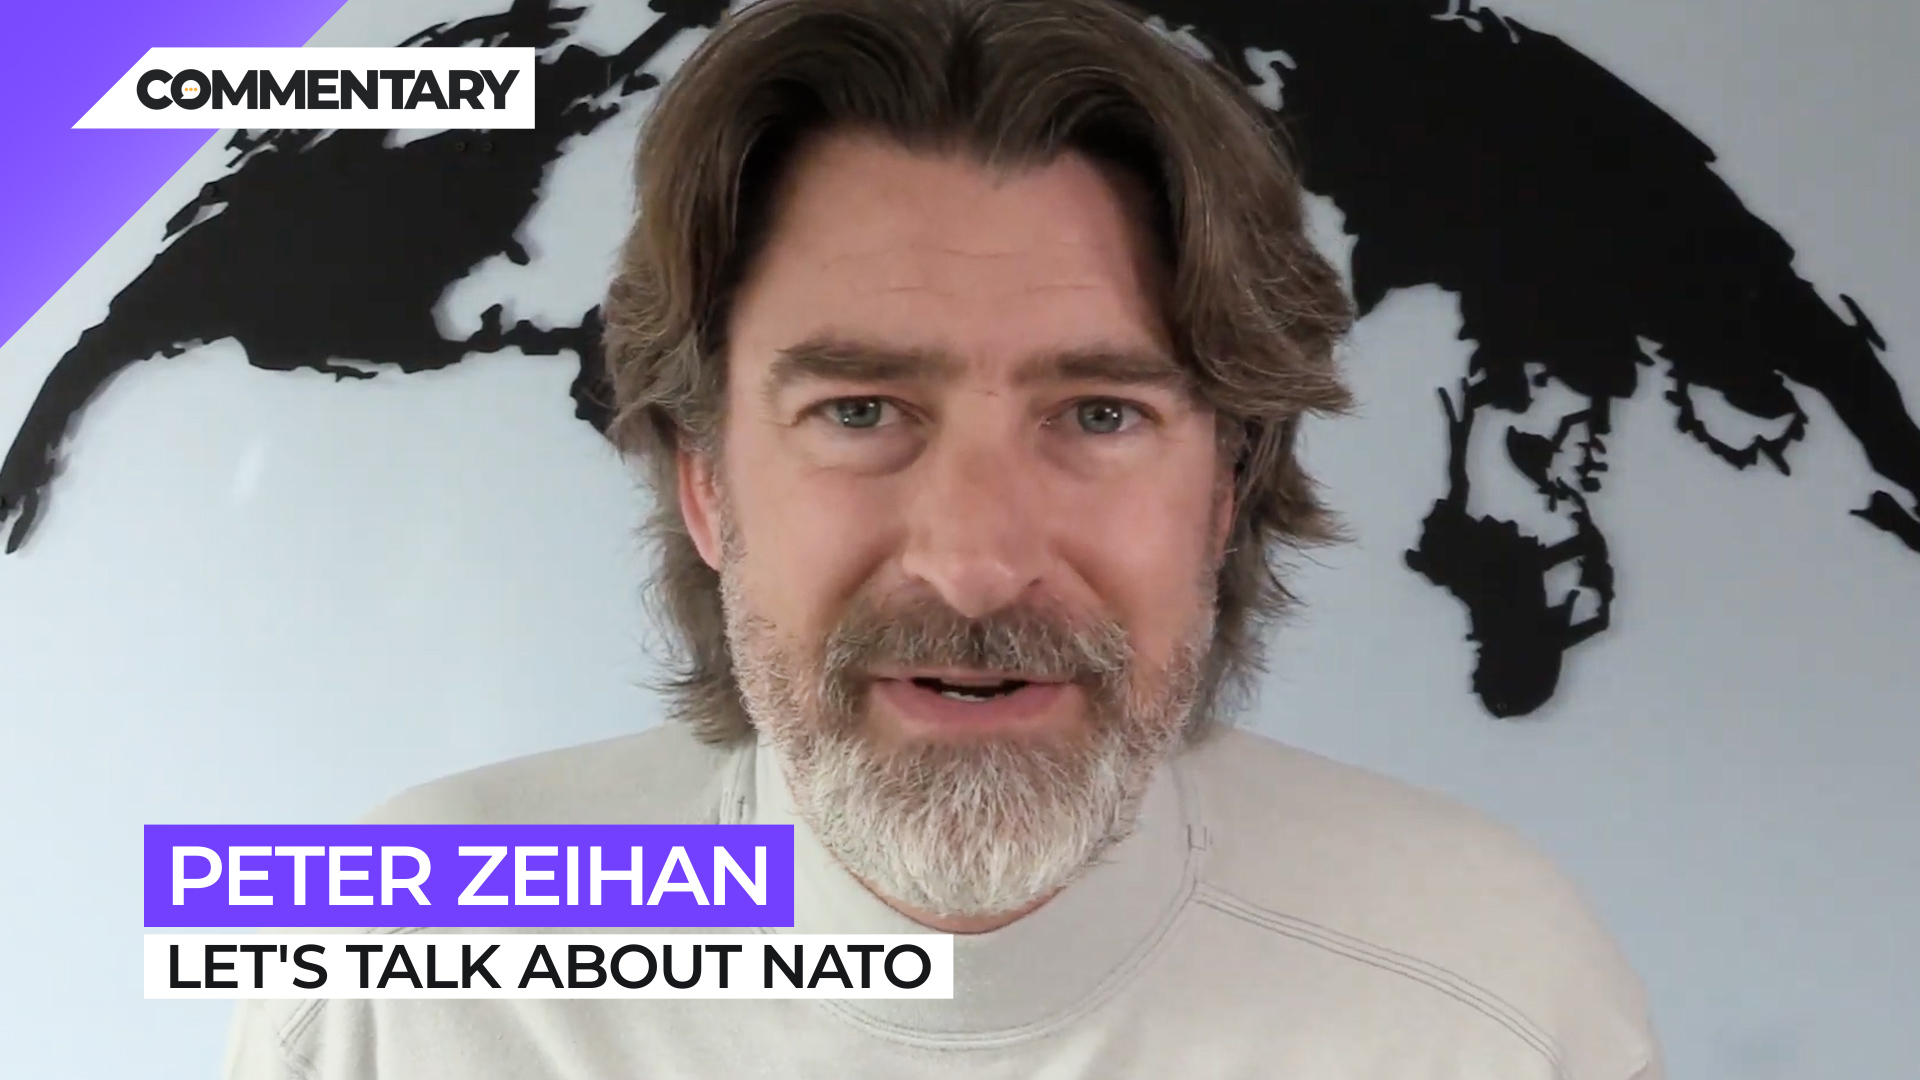 Peter Zeihan explains why Sweden and Finland are considering joining NATO.